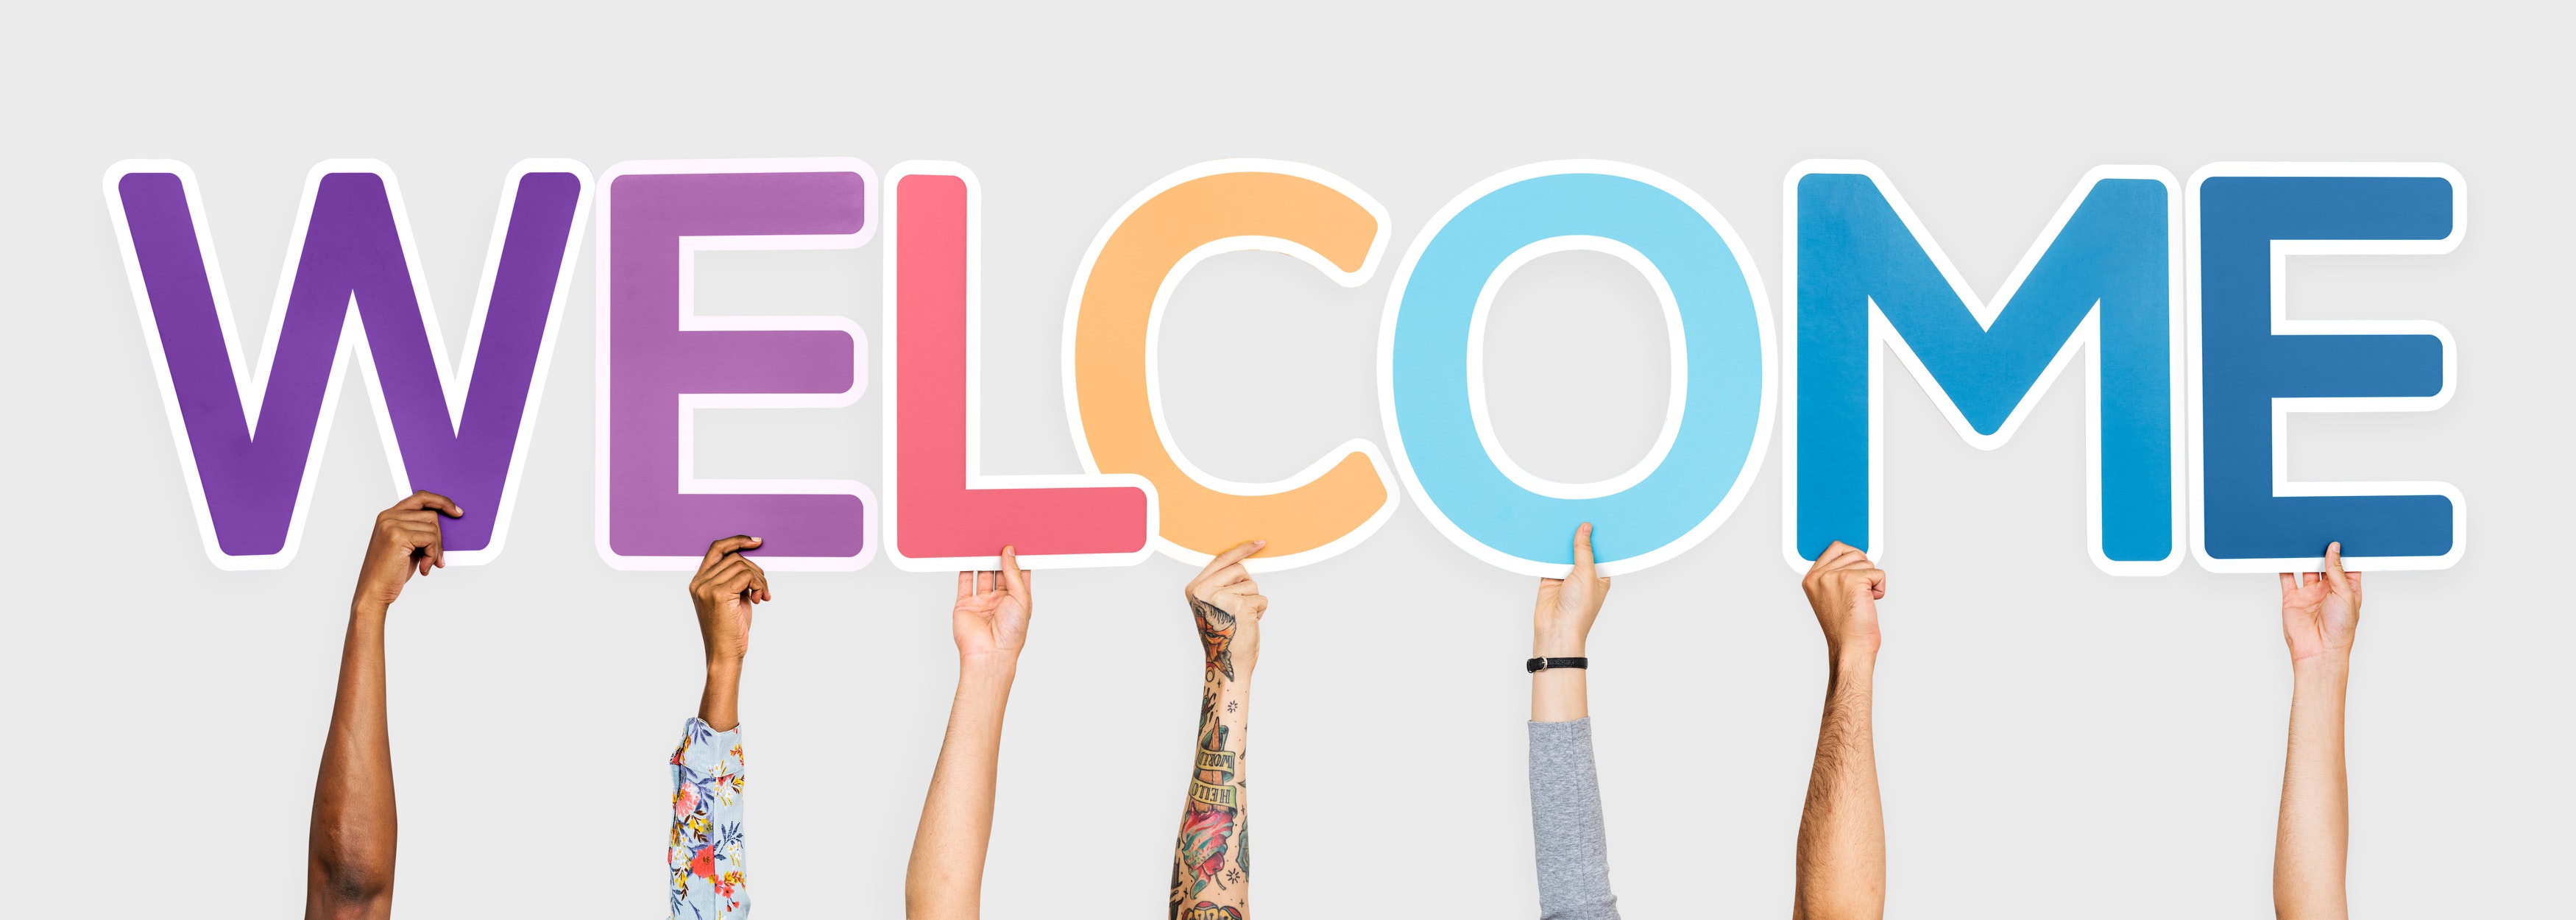 The word "welcome" spelled out with different colored letters held by different people's hands